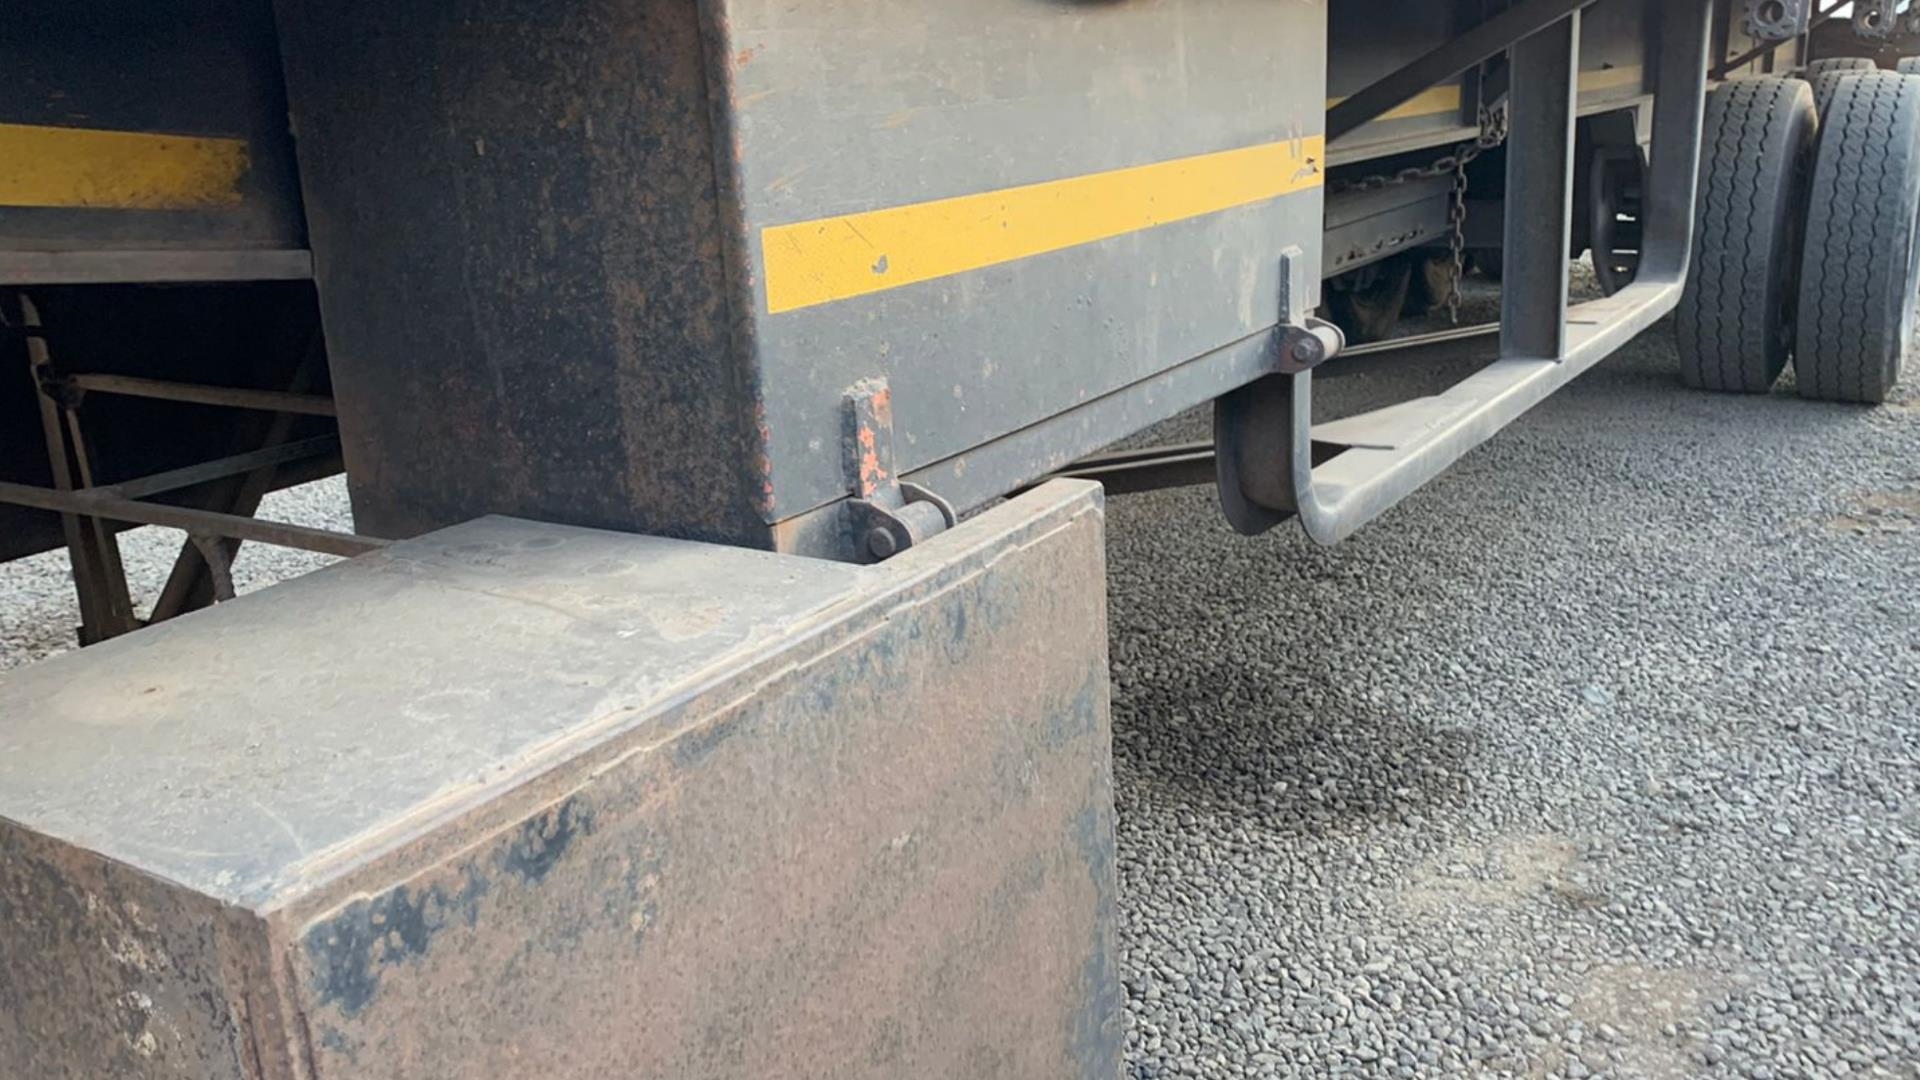 Hendred Trailers 2003 Hendred 13m Tri Axle 2003 for sale by Truck and Plant Connection | Truck & Trailer Marketplaces